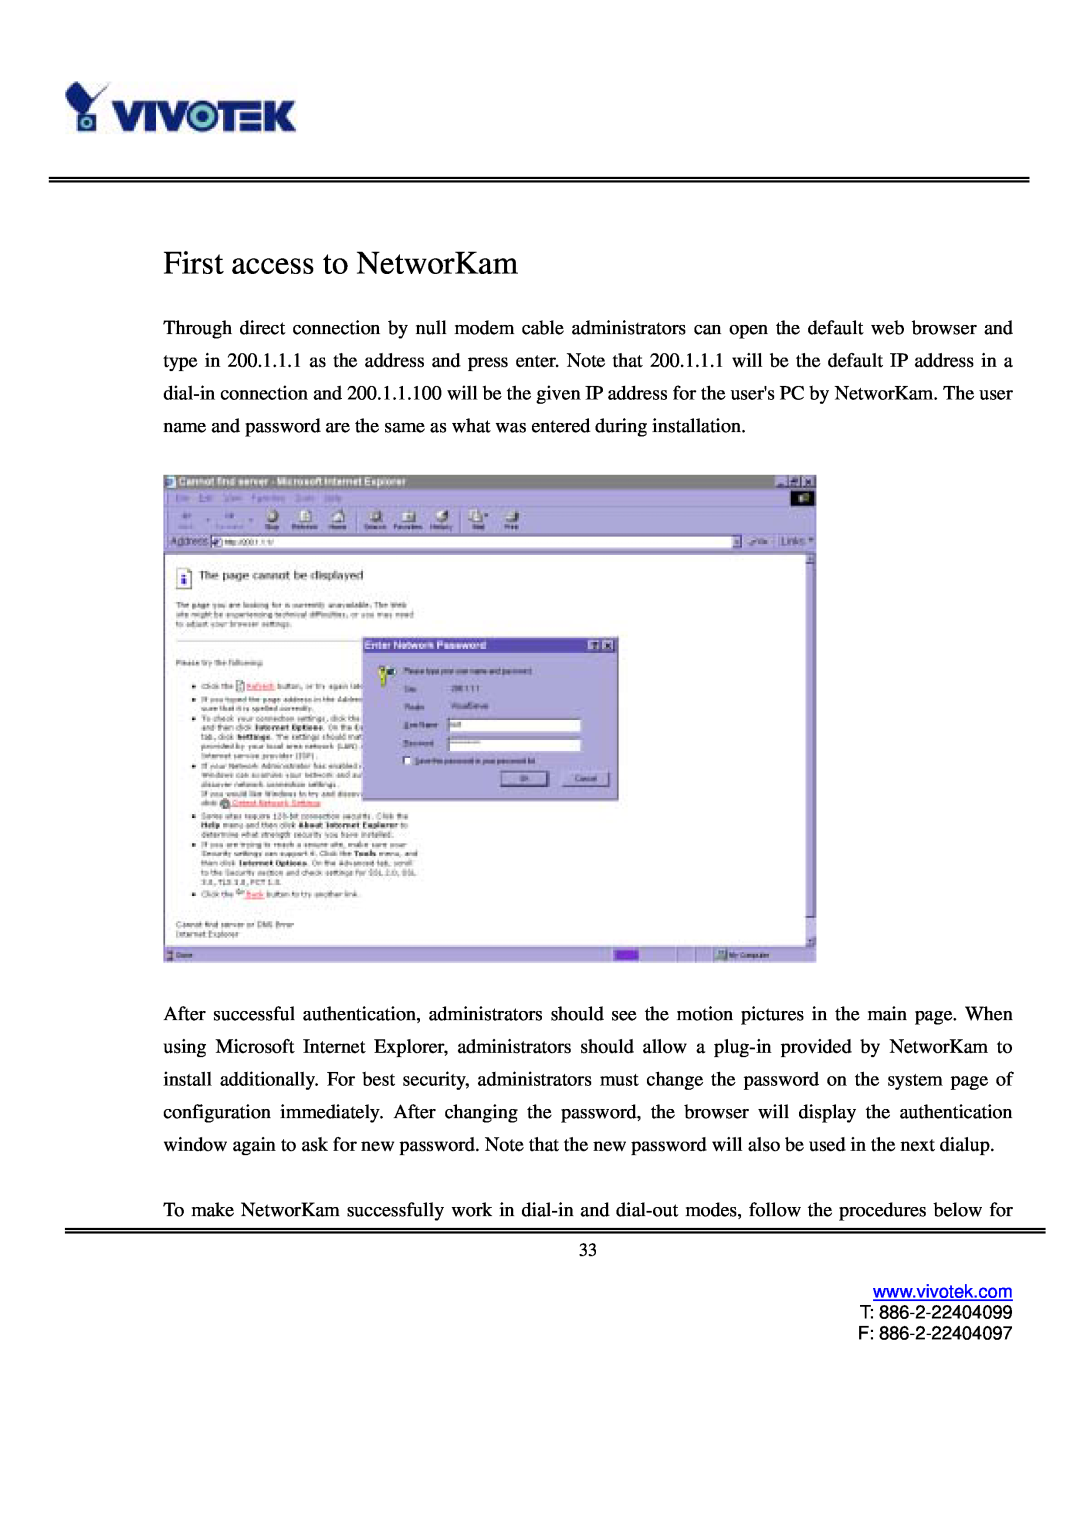 Vivotek IP3111/IP3121 user manual First access to NetworKam 